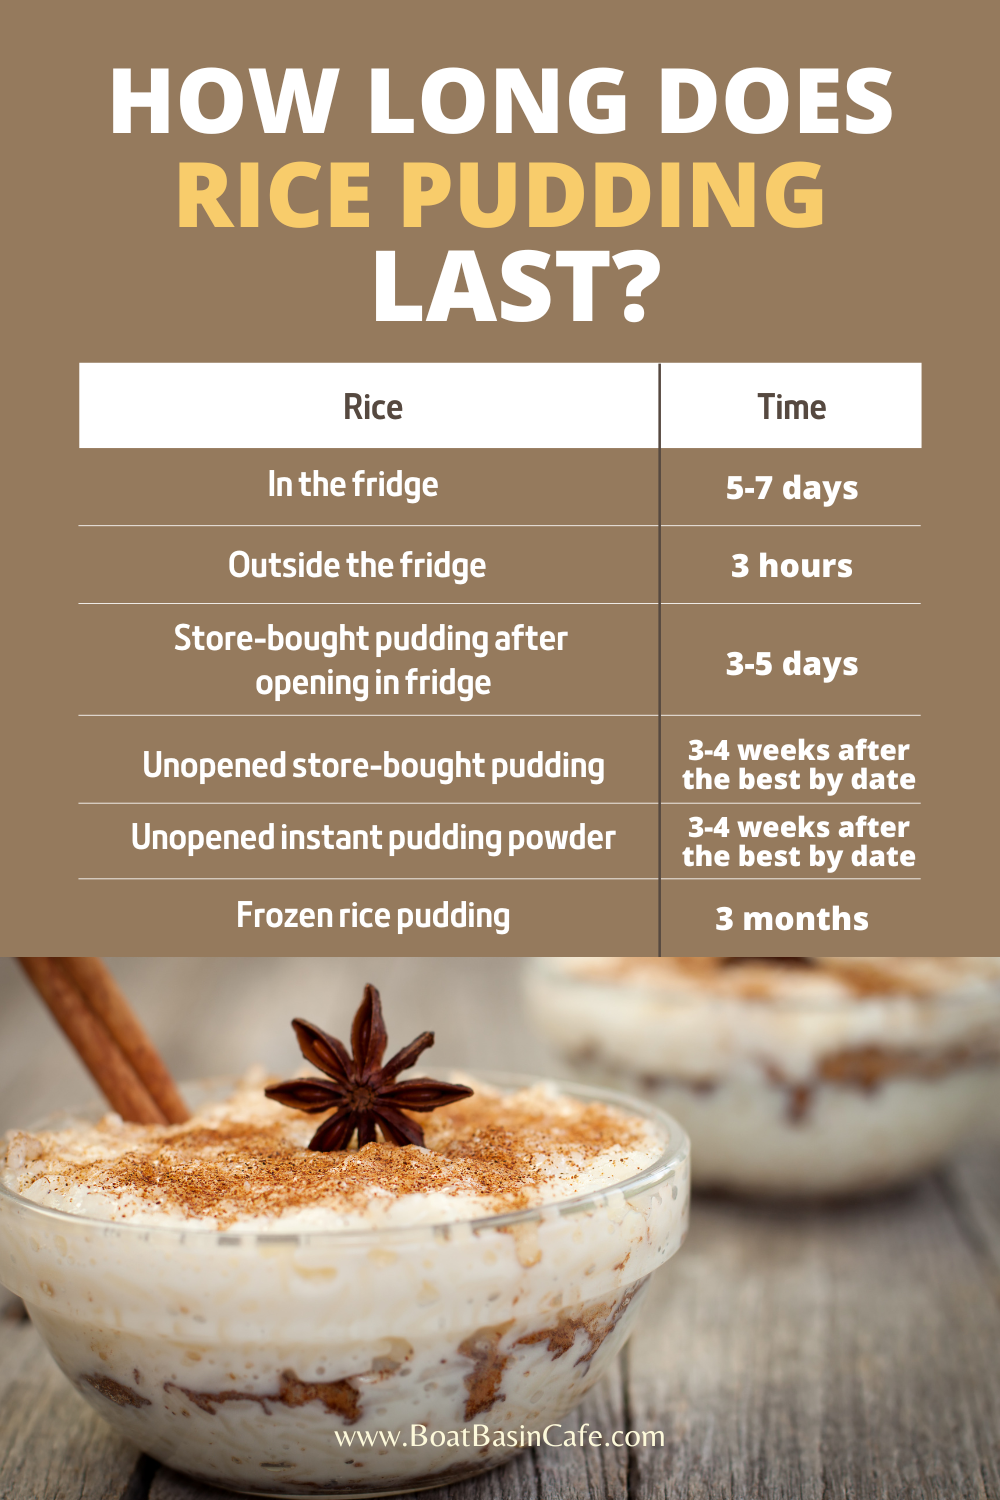 How Long Does Rice Pudding Last In The Fridge?